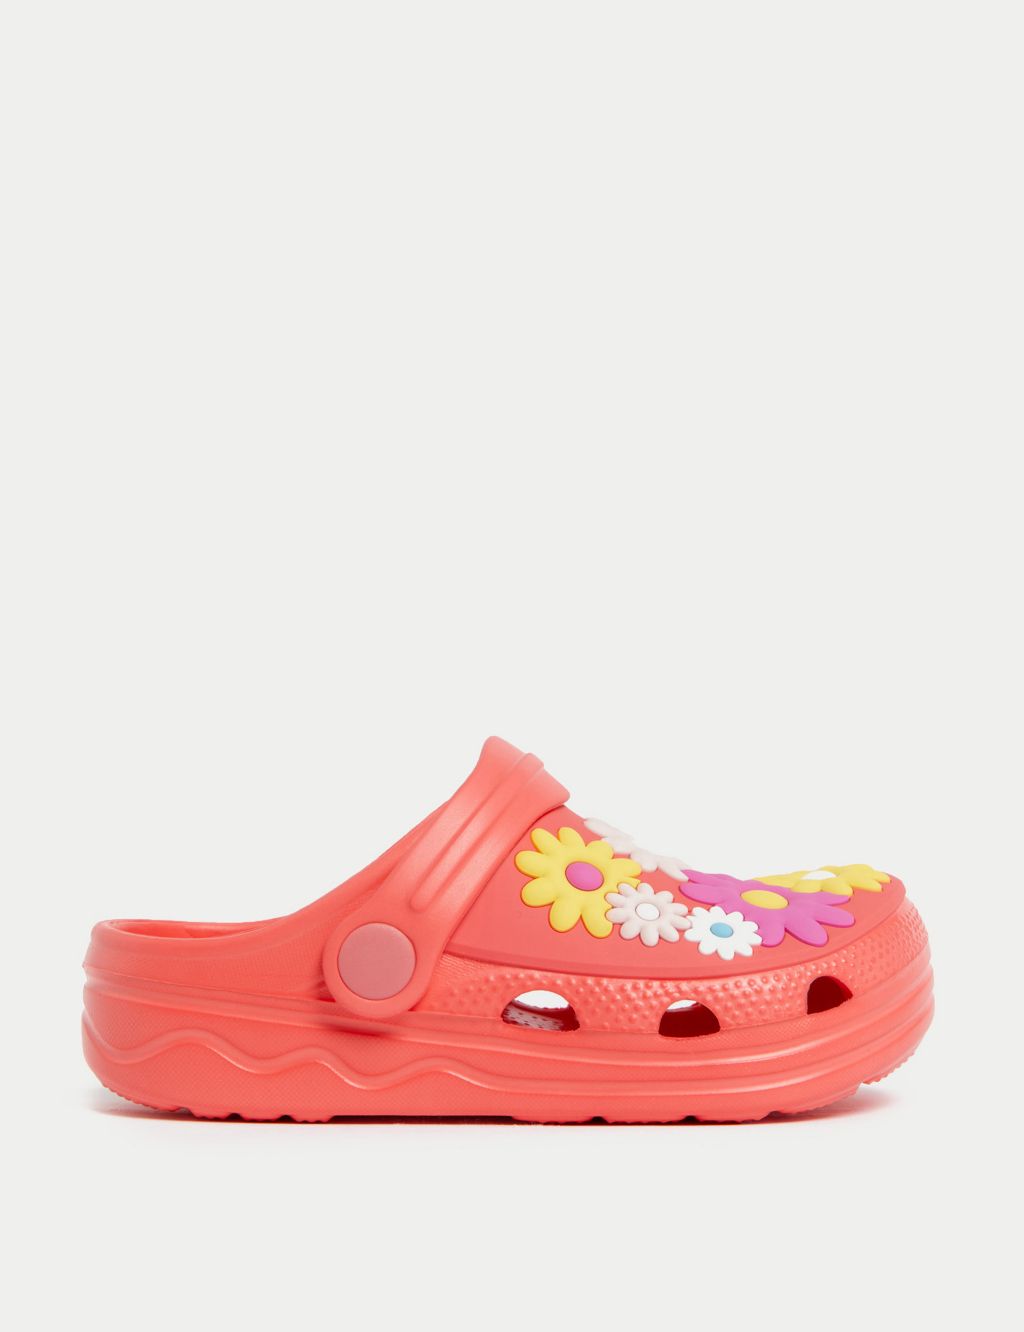 Kids' Floral Clogs (4 Small - 2 Large) image 1